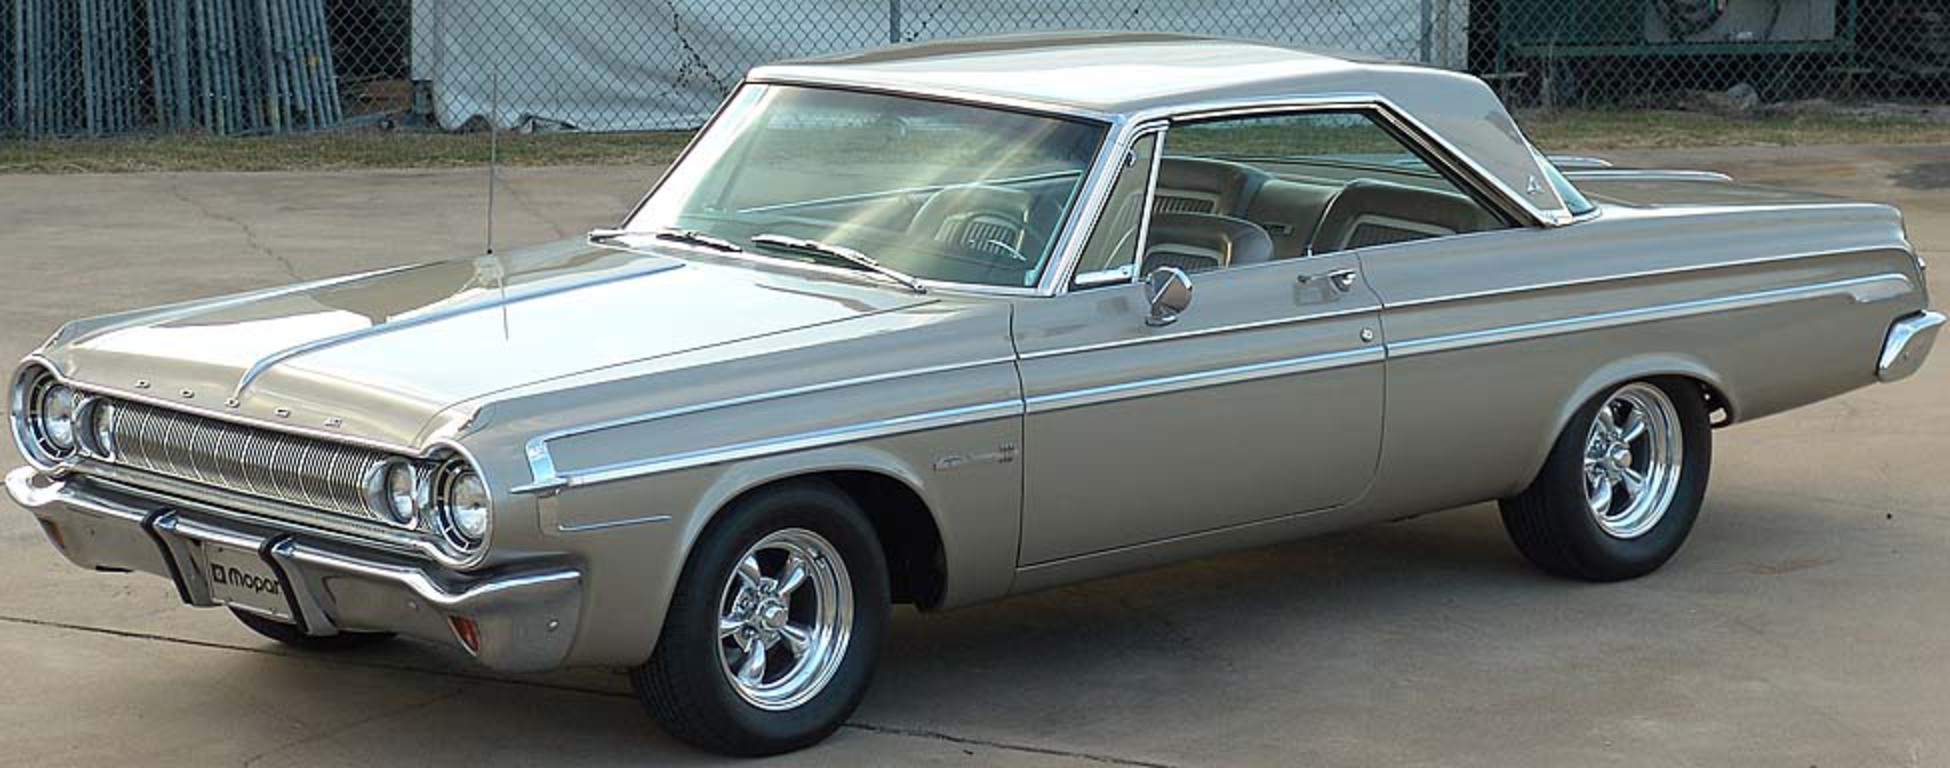 1964 DODGE CHARGER 500